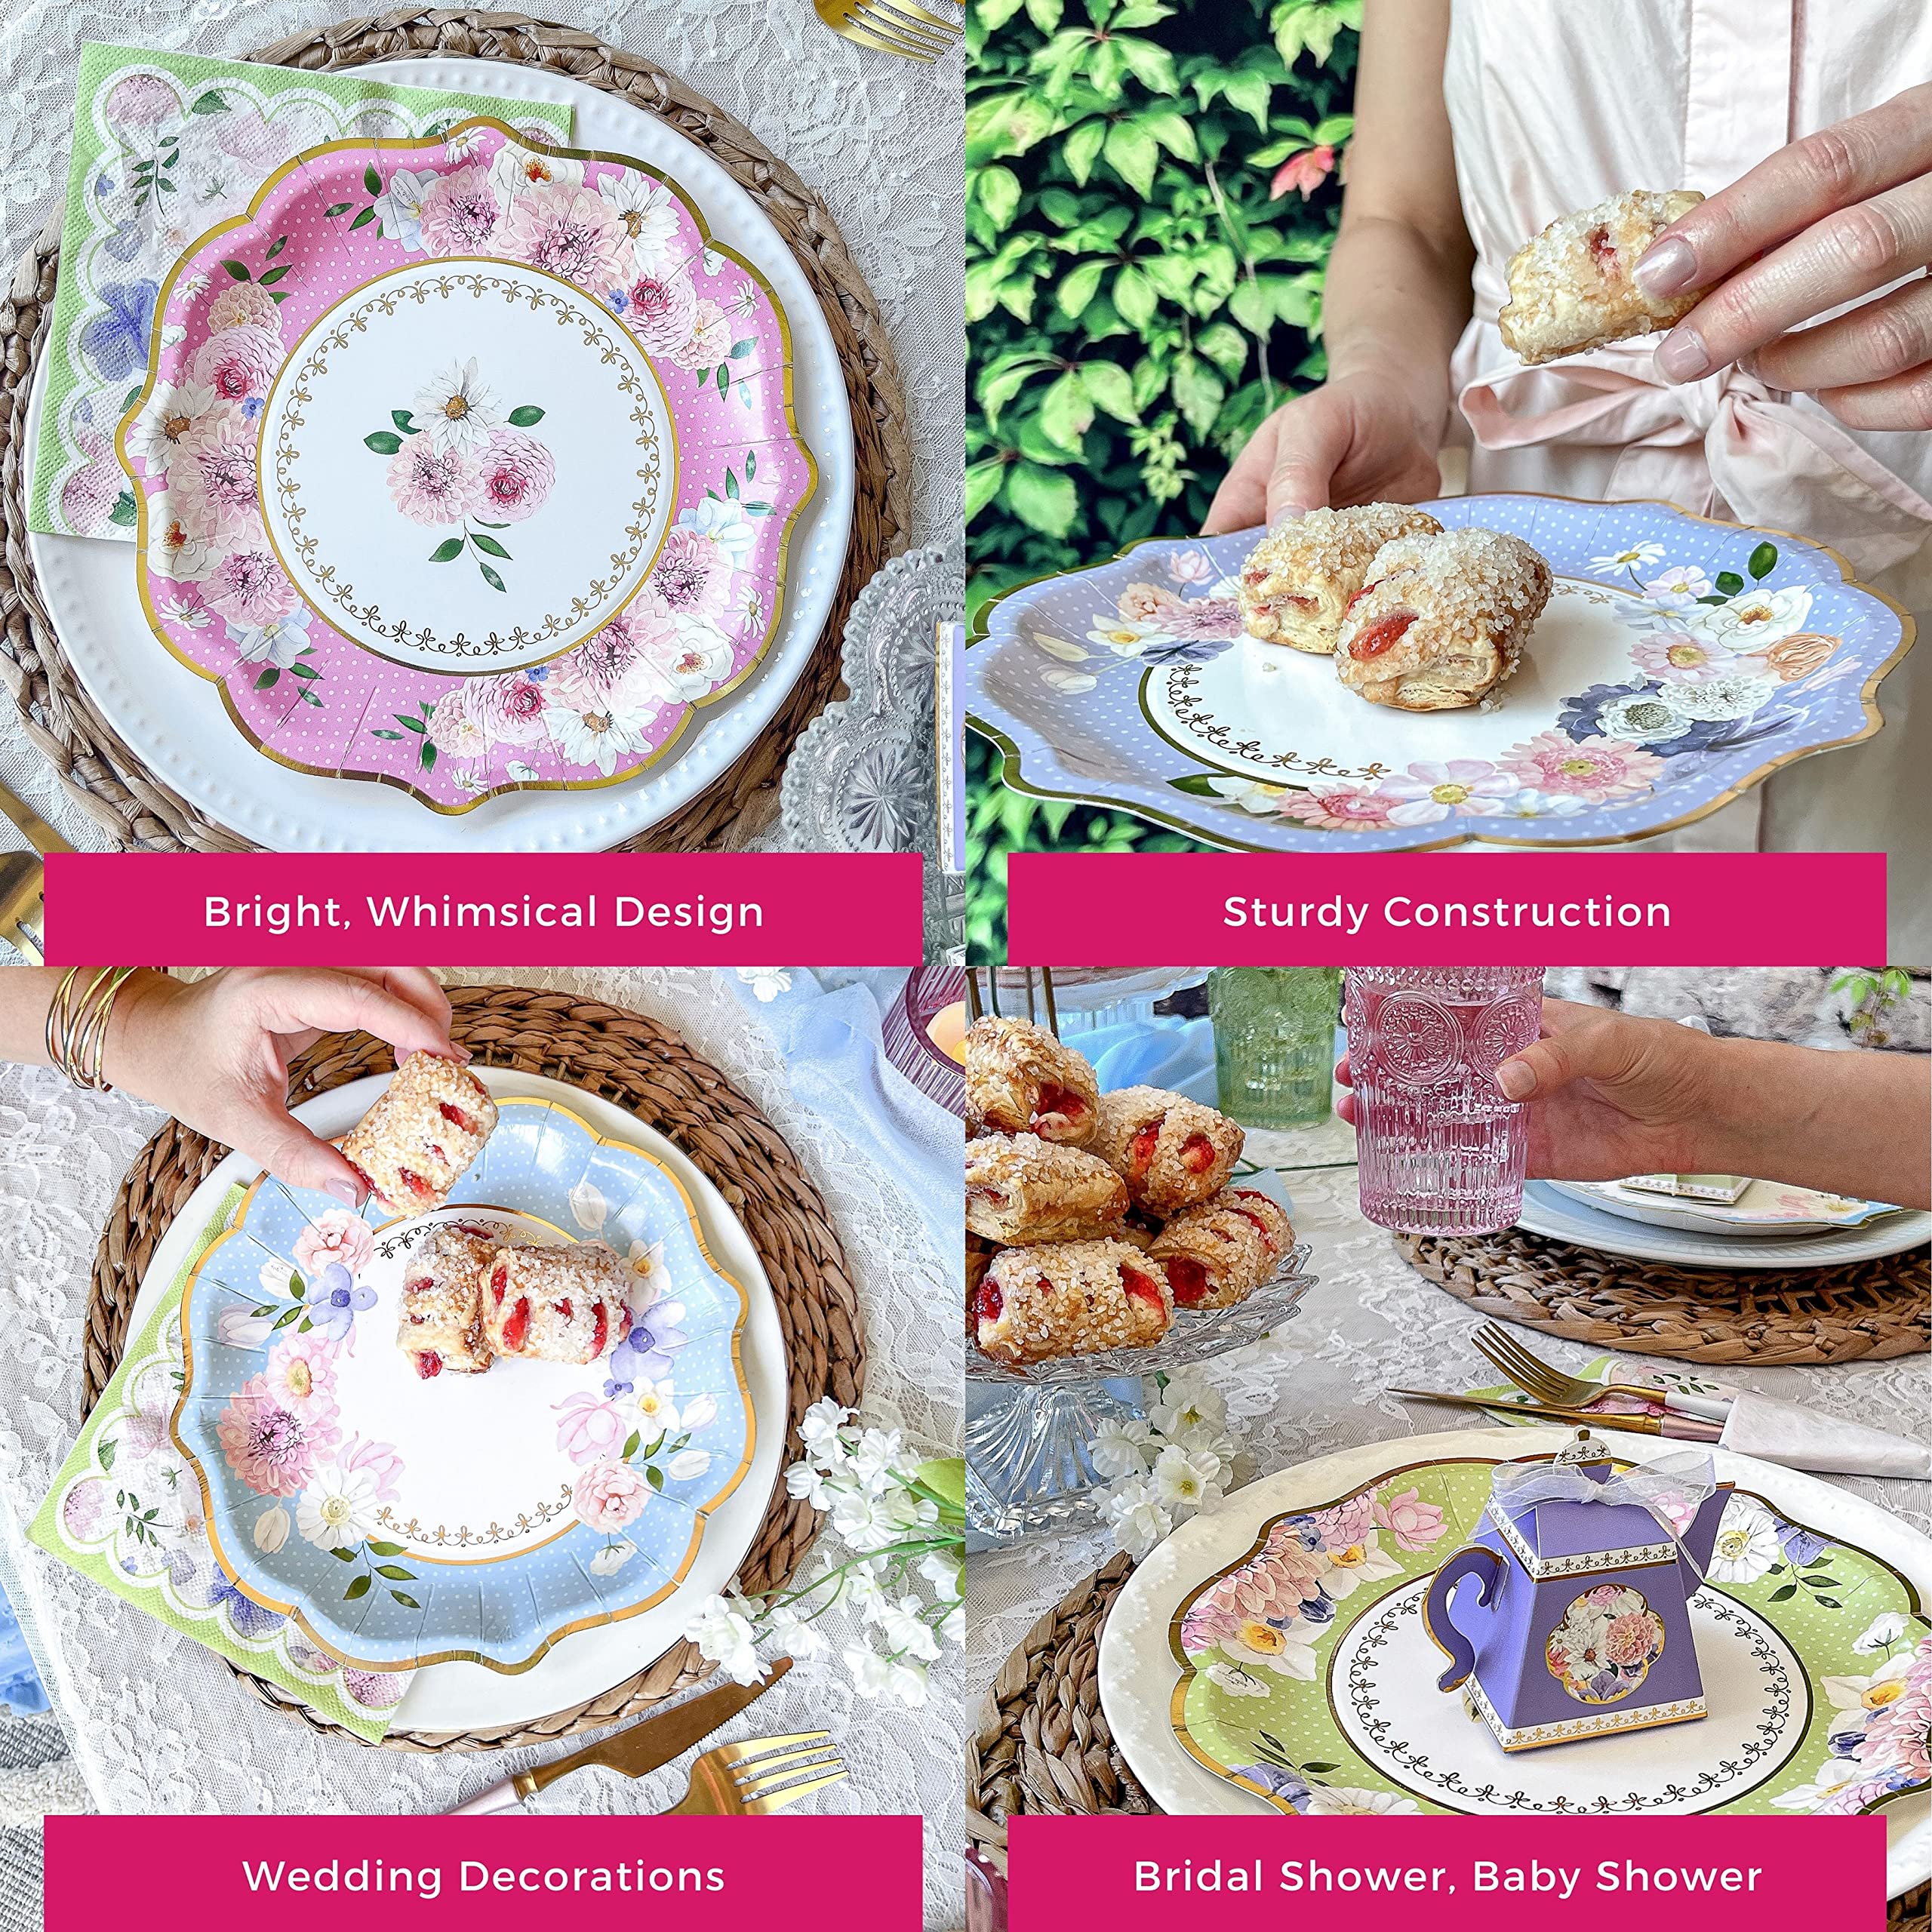 Kate Aspen 9 in. Premium Paper (Assorted Set of 16) Tea Party Decorations, One Size, 9 Inch Plates